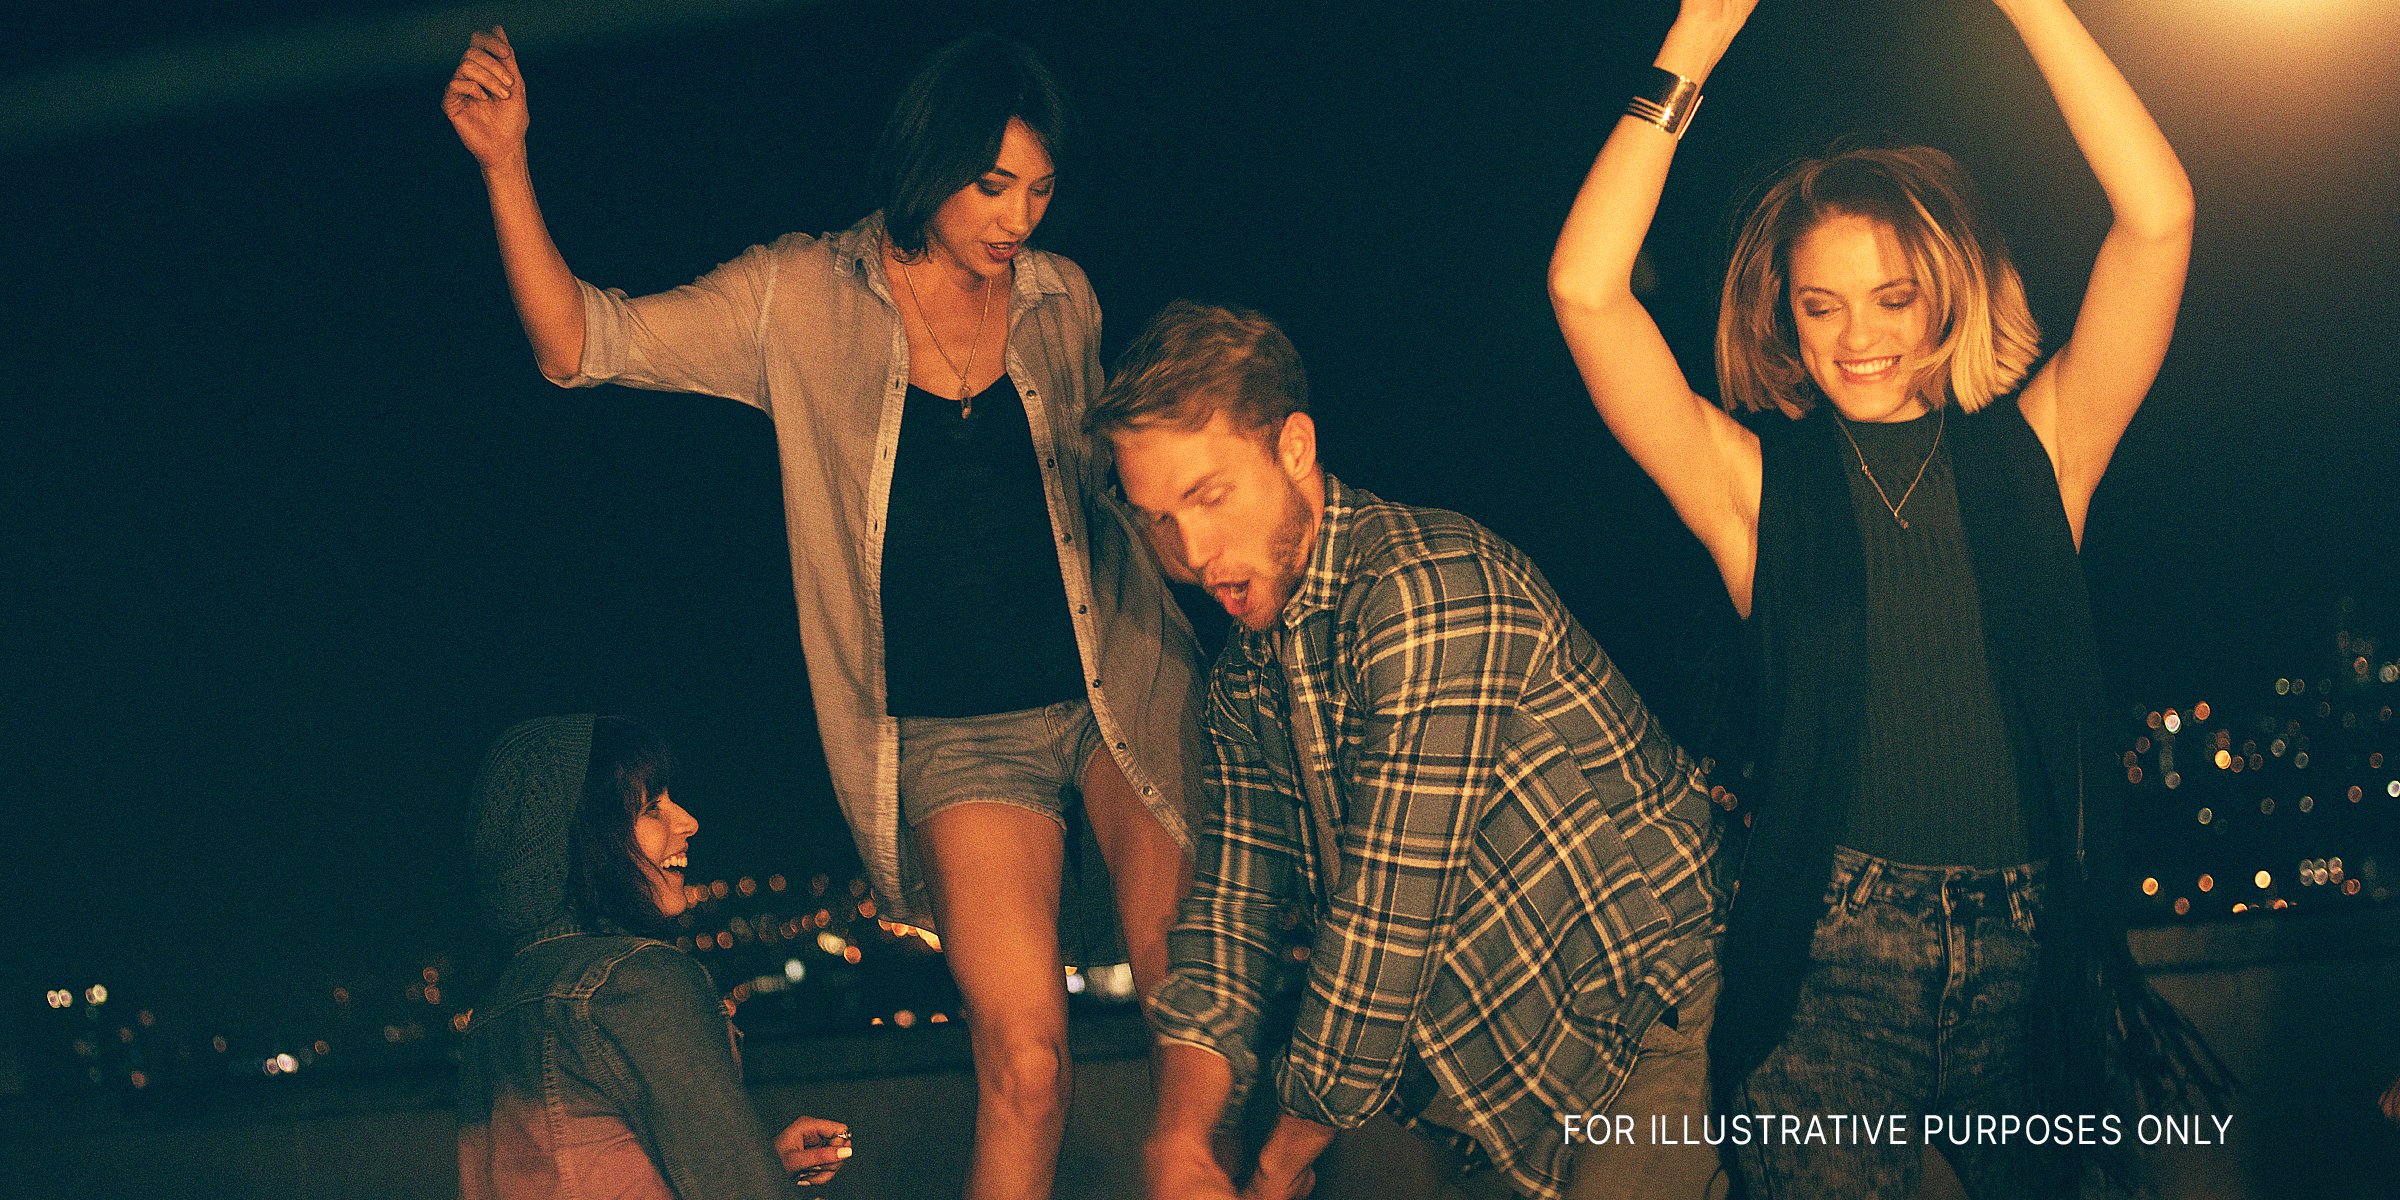 People partying | Source: Getty Images